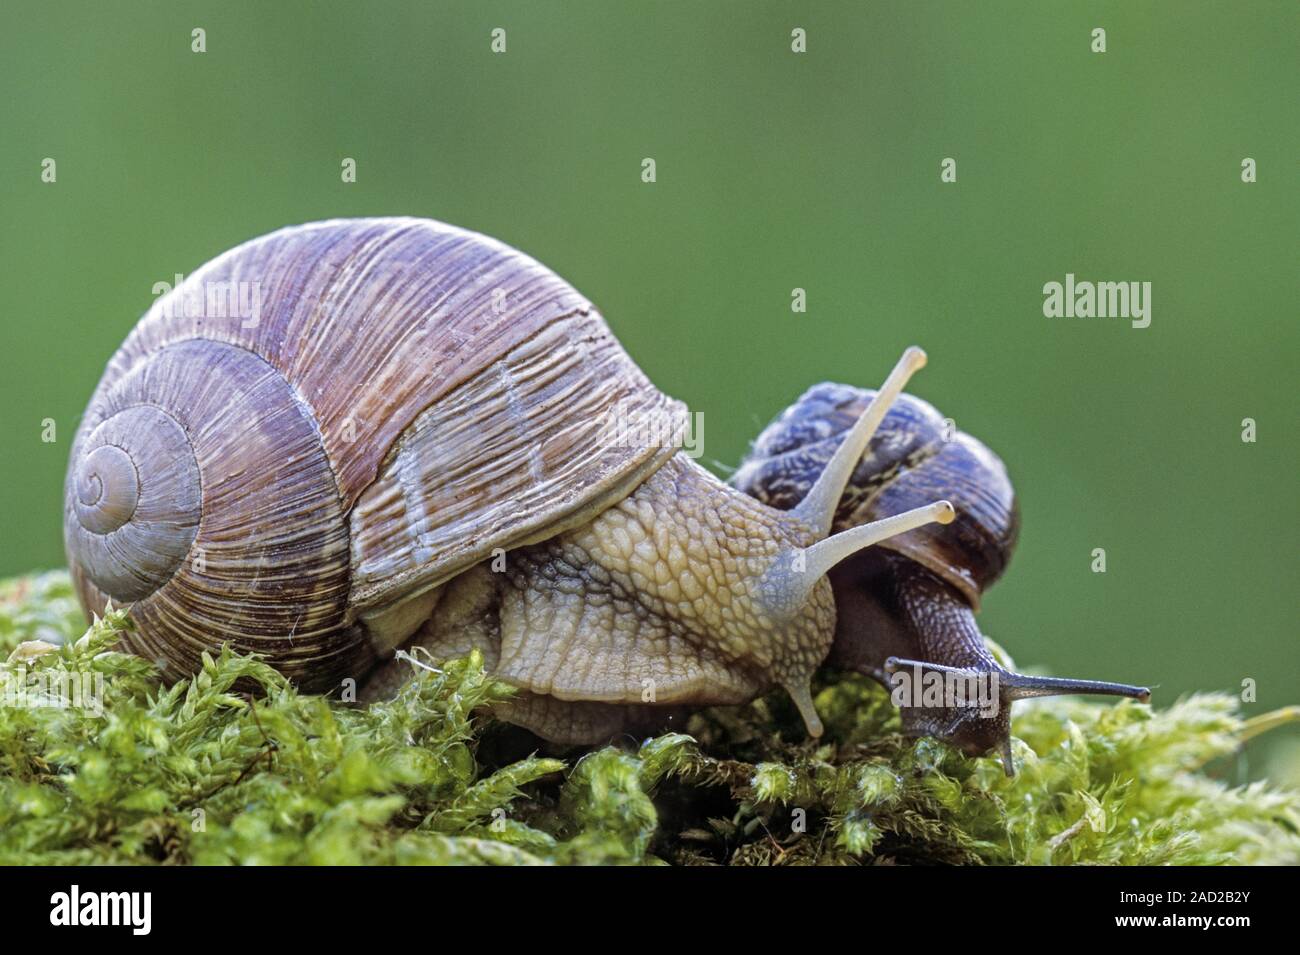 Edible Snail, cooked snails are called Escargots  -  (Burgundy Snail and Copse Snail) Stock Photo